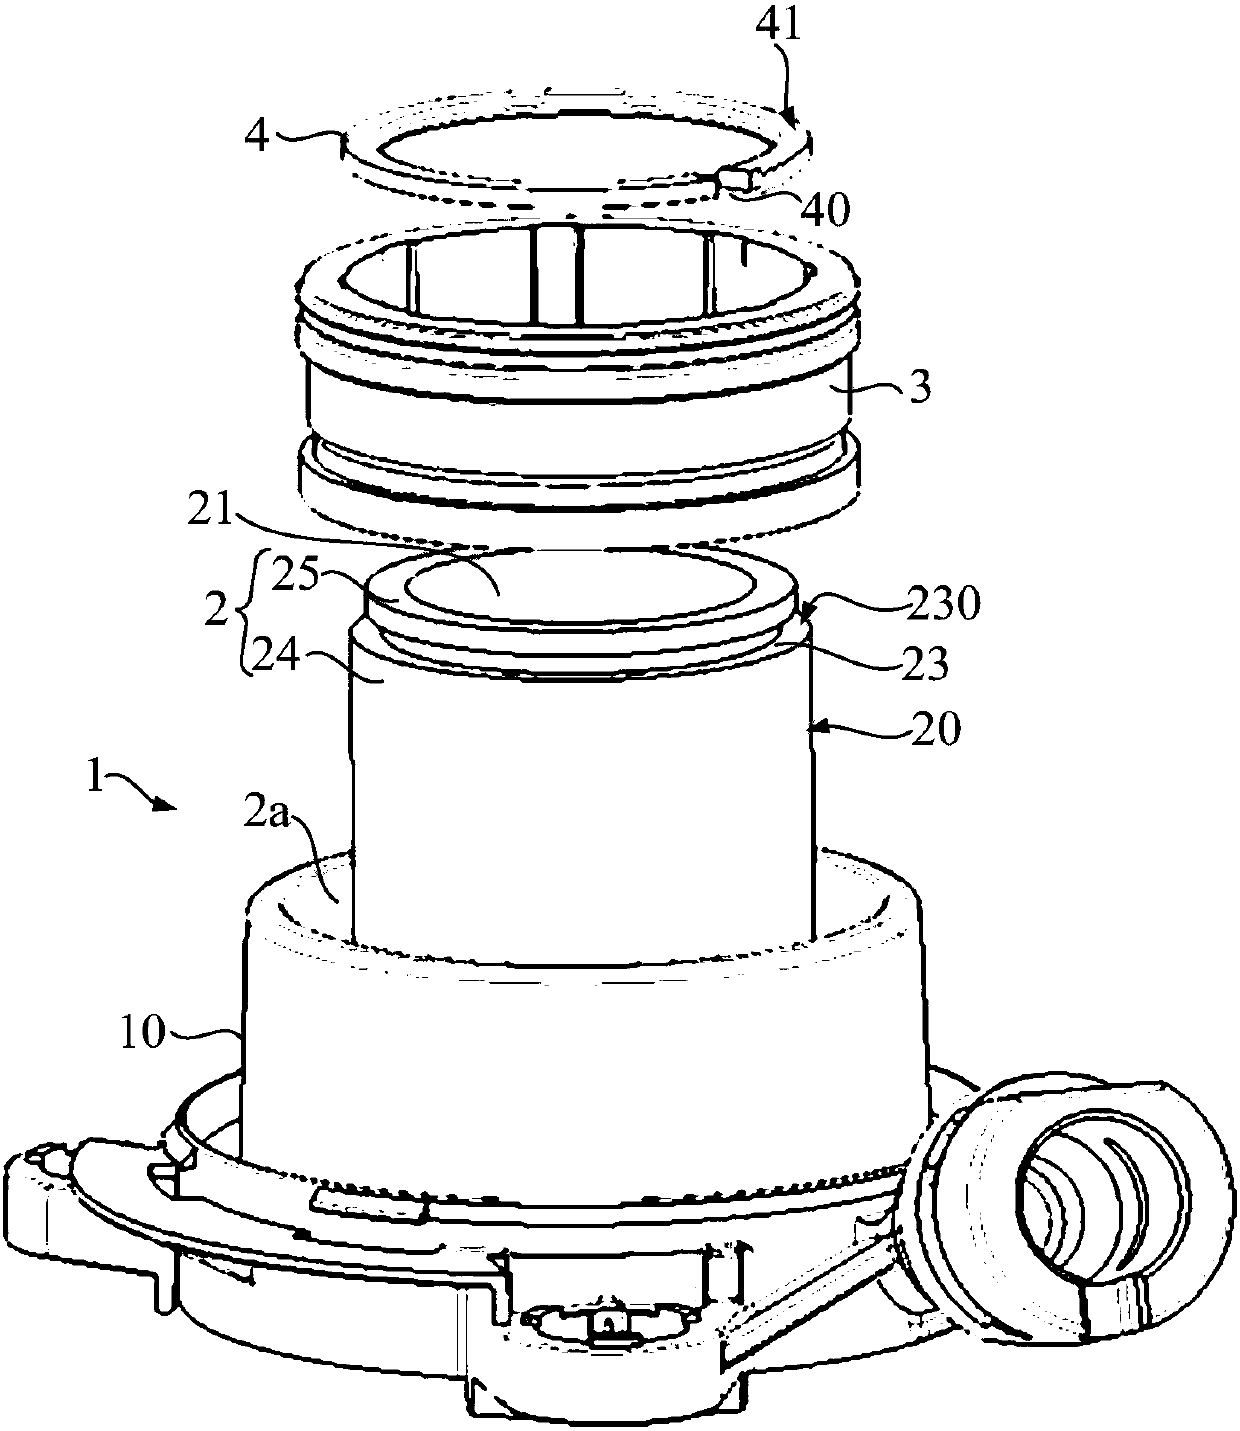 Clutch separation system and clutch driven cylinder